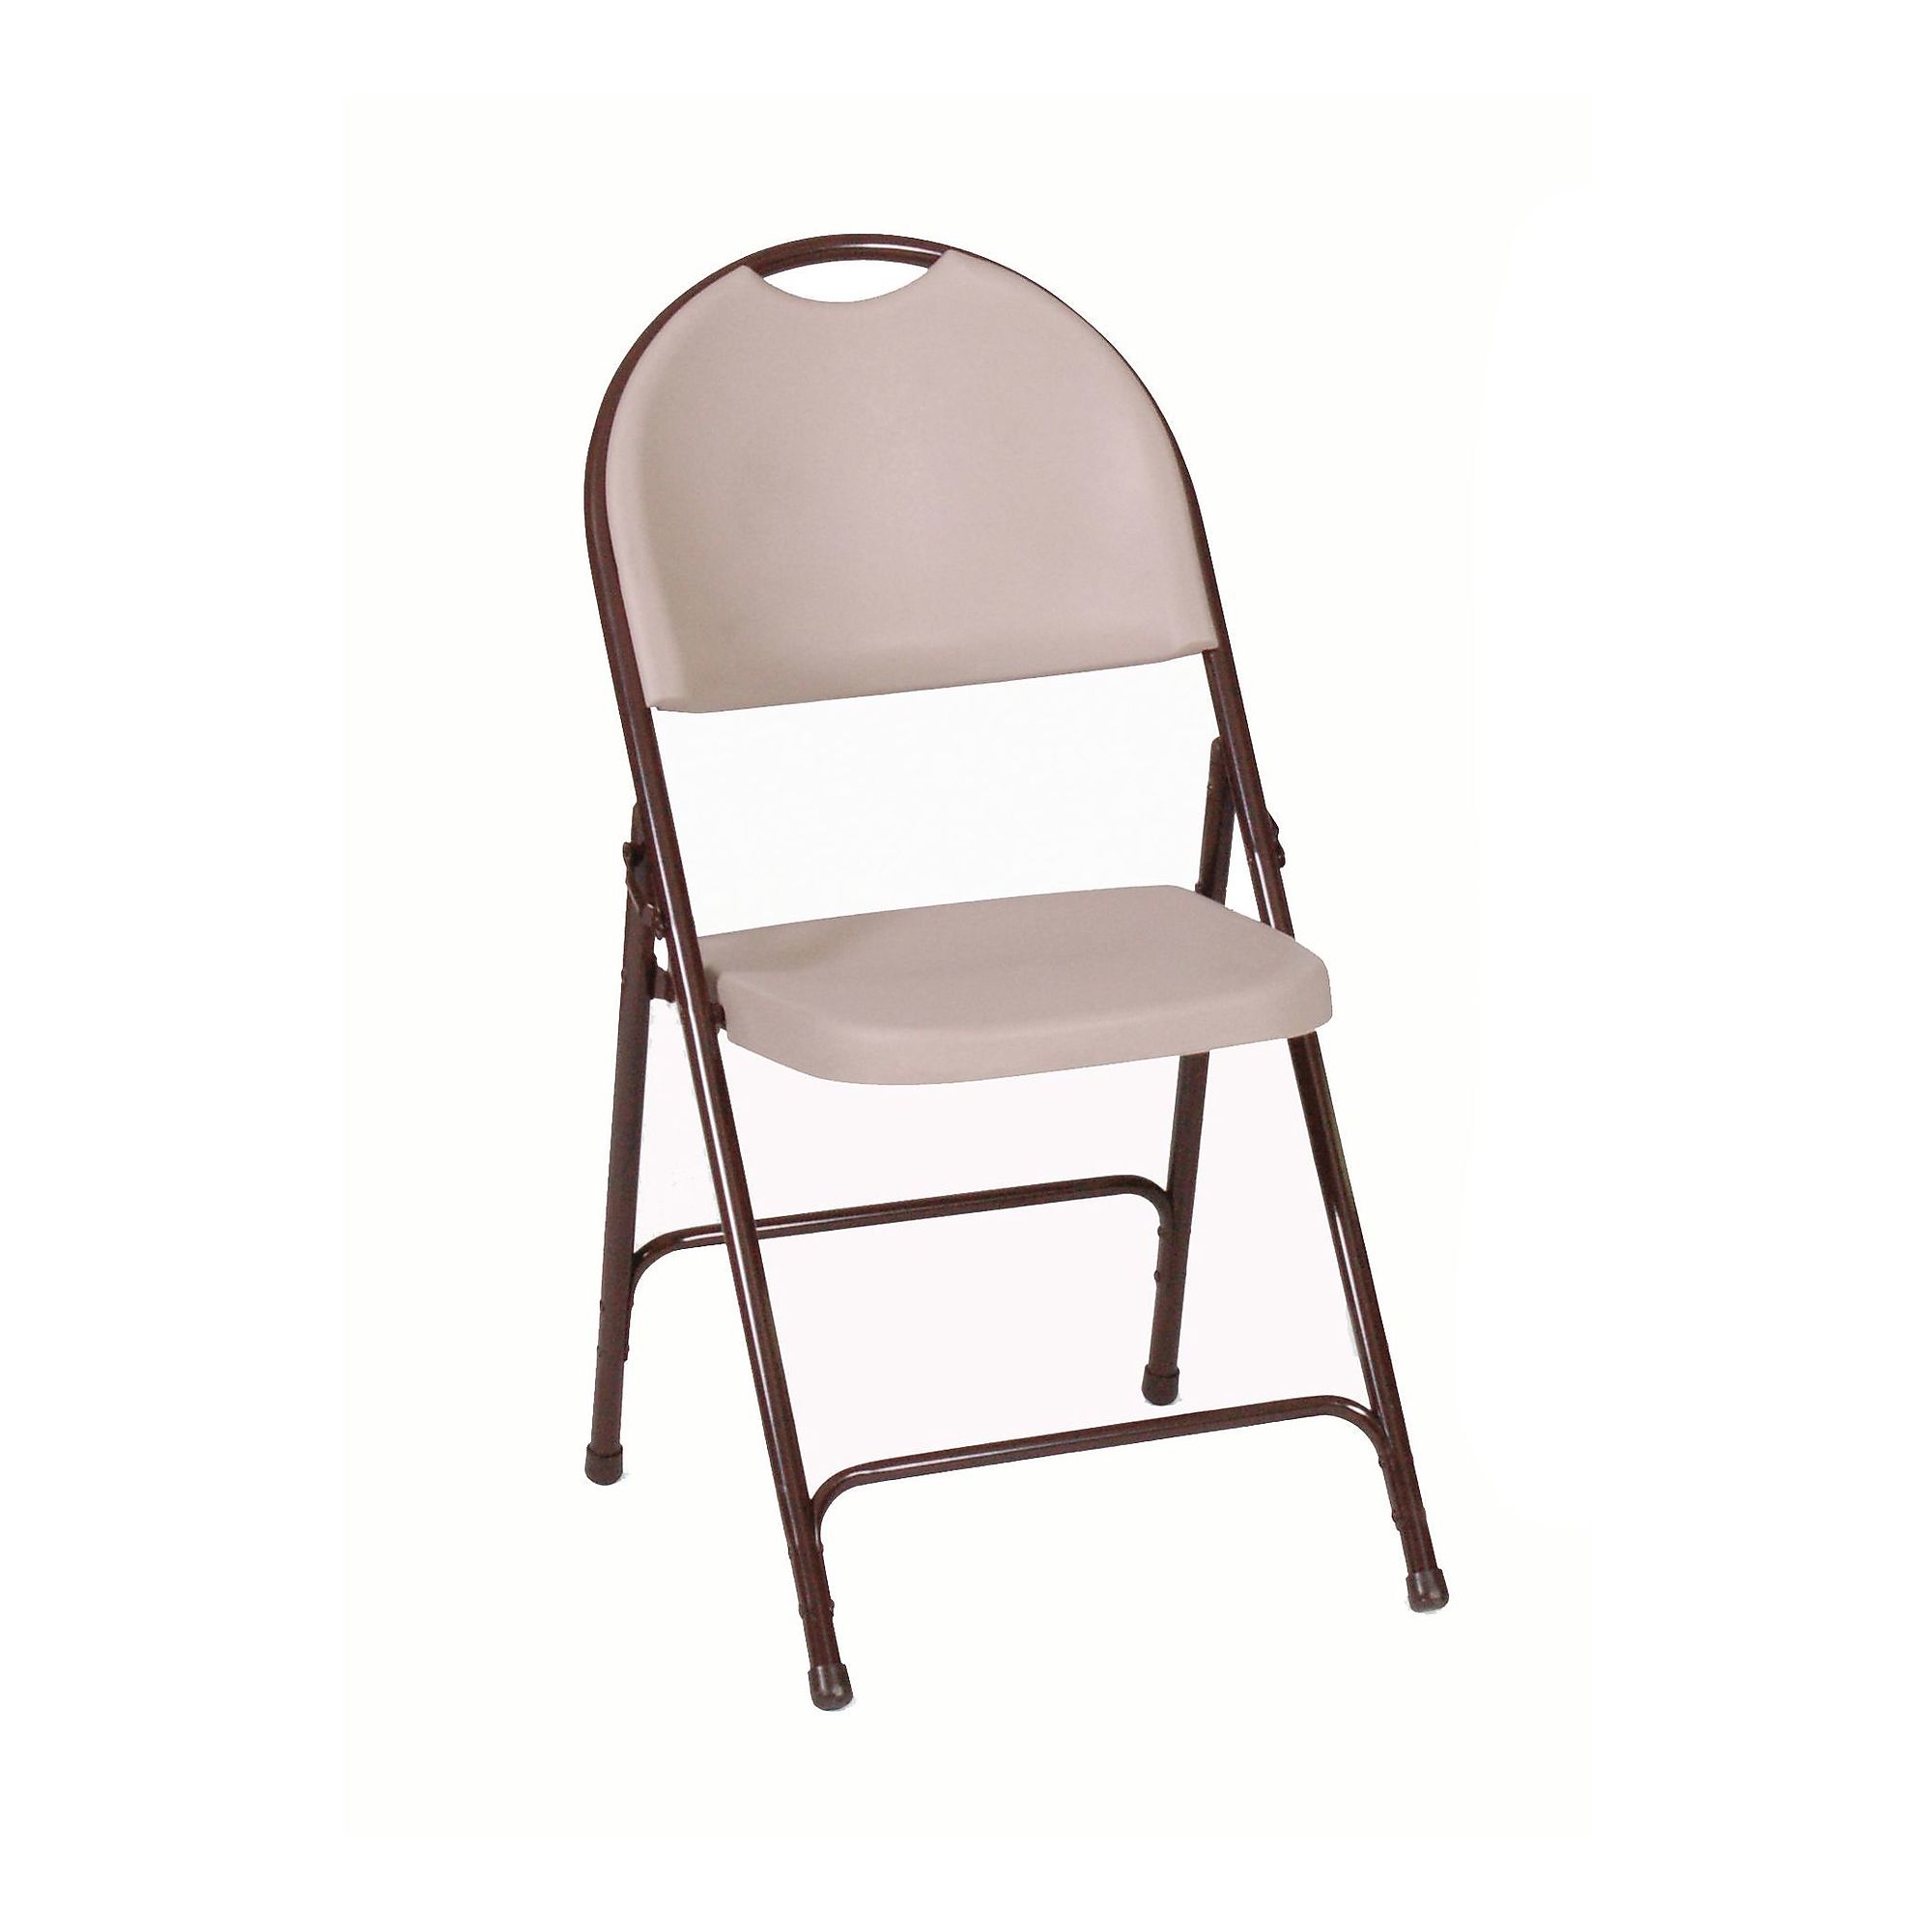 Correll, Heavy Duty Plastic Fold-Chair, 4PK, Mocha Granite, Primary Color Tan, Included (qty.) 4, Model RC350-24